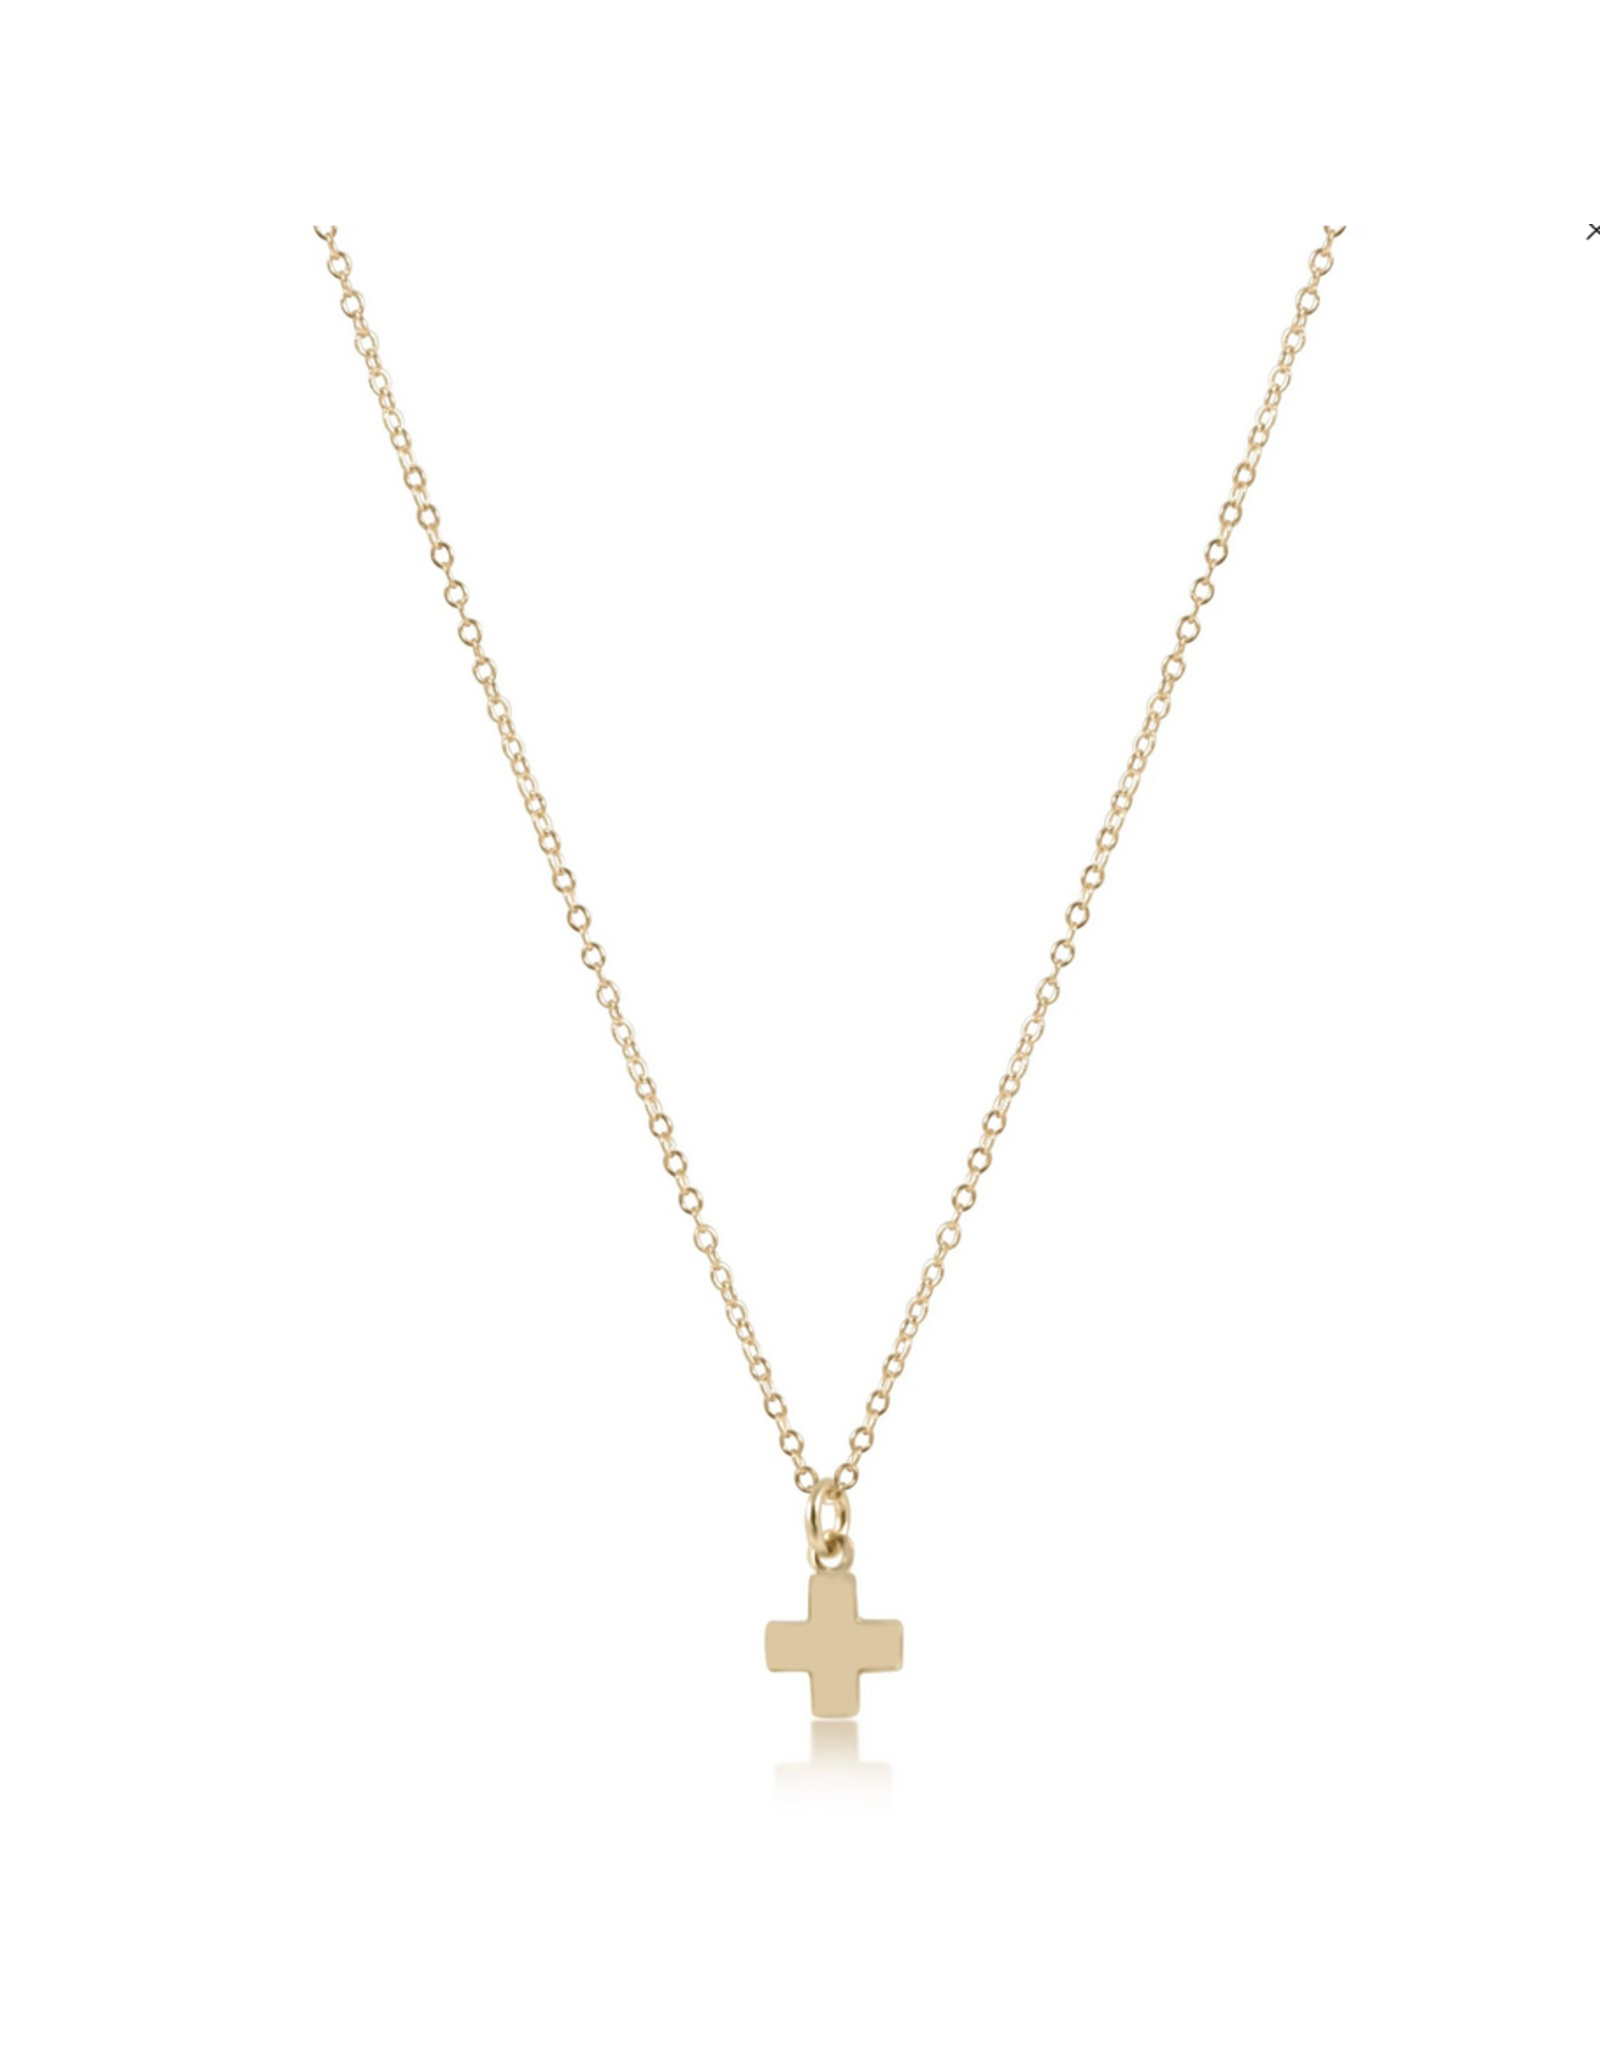 enewton 16" Necklace Gold - Signature Cross Small Gold Charm